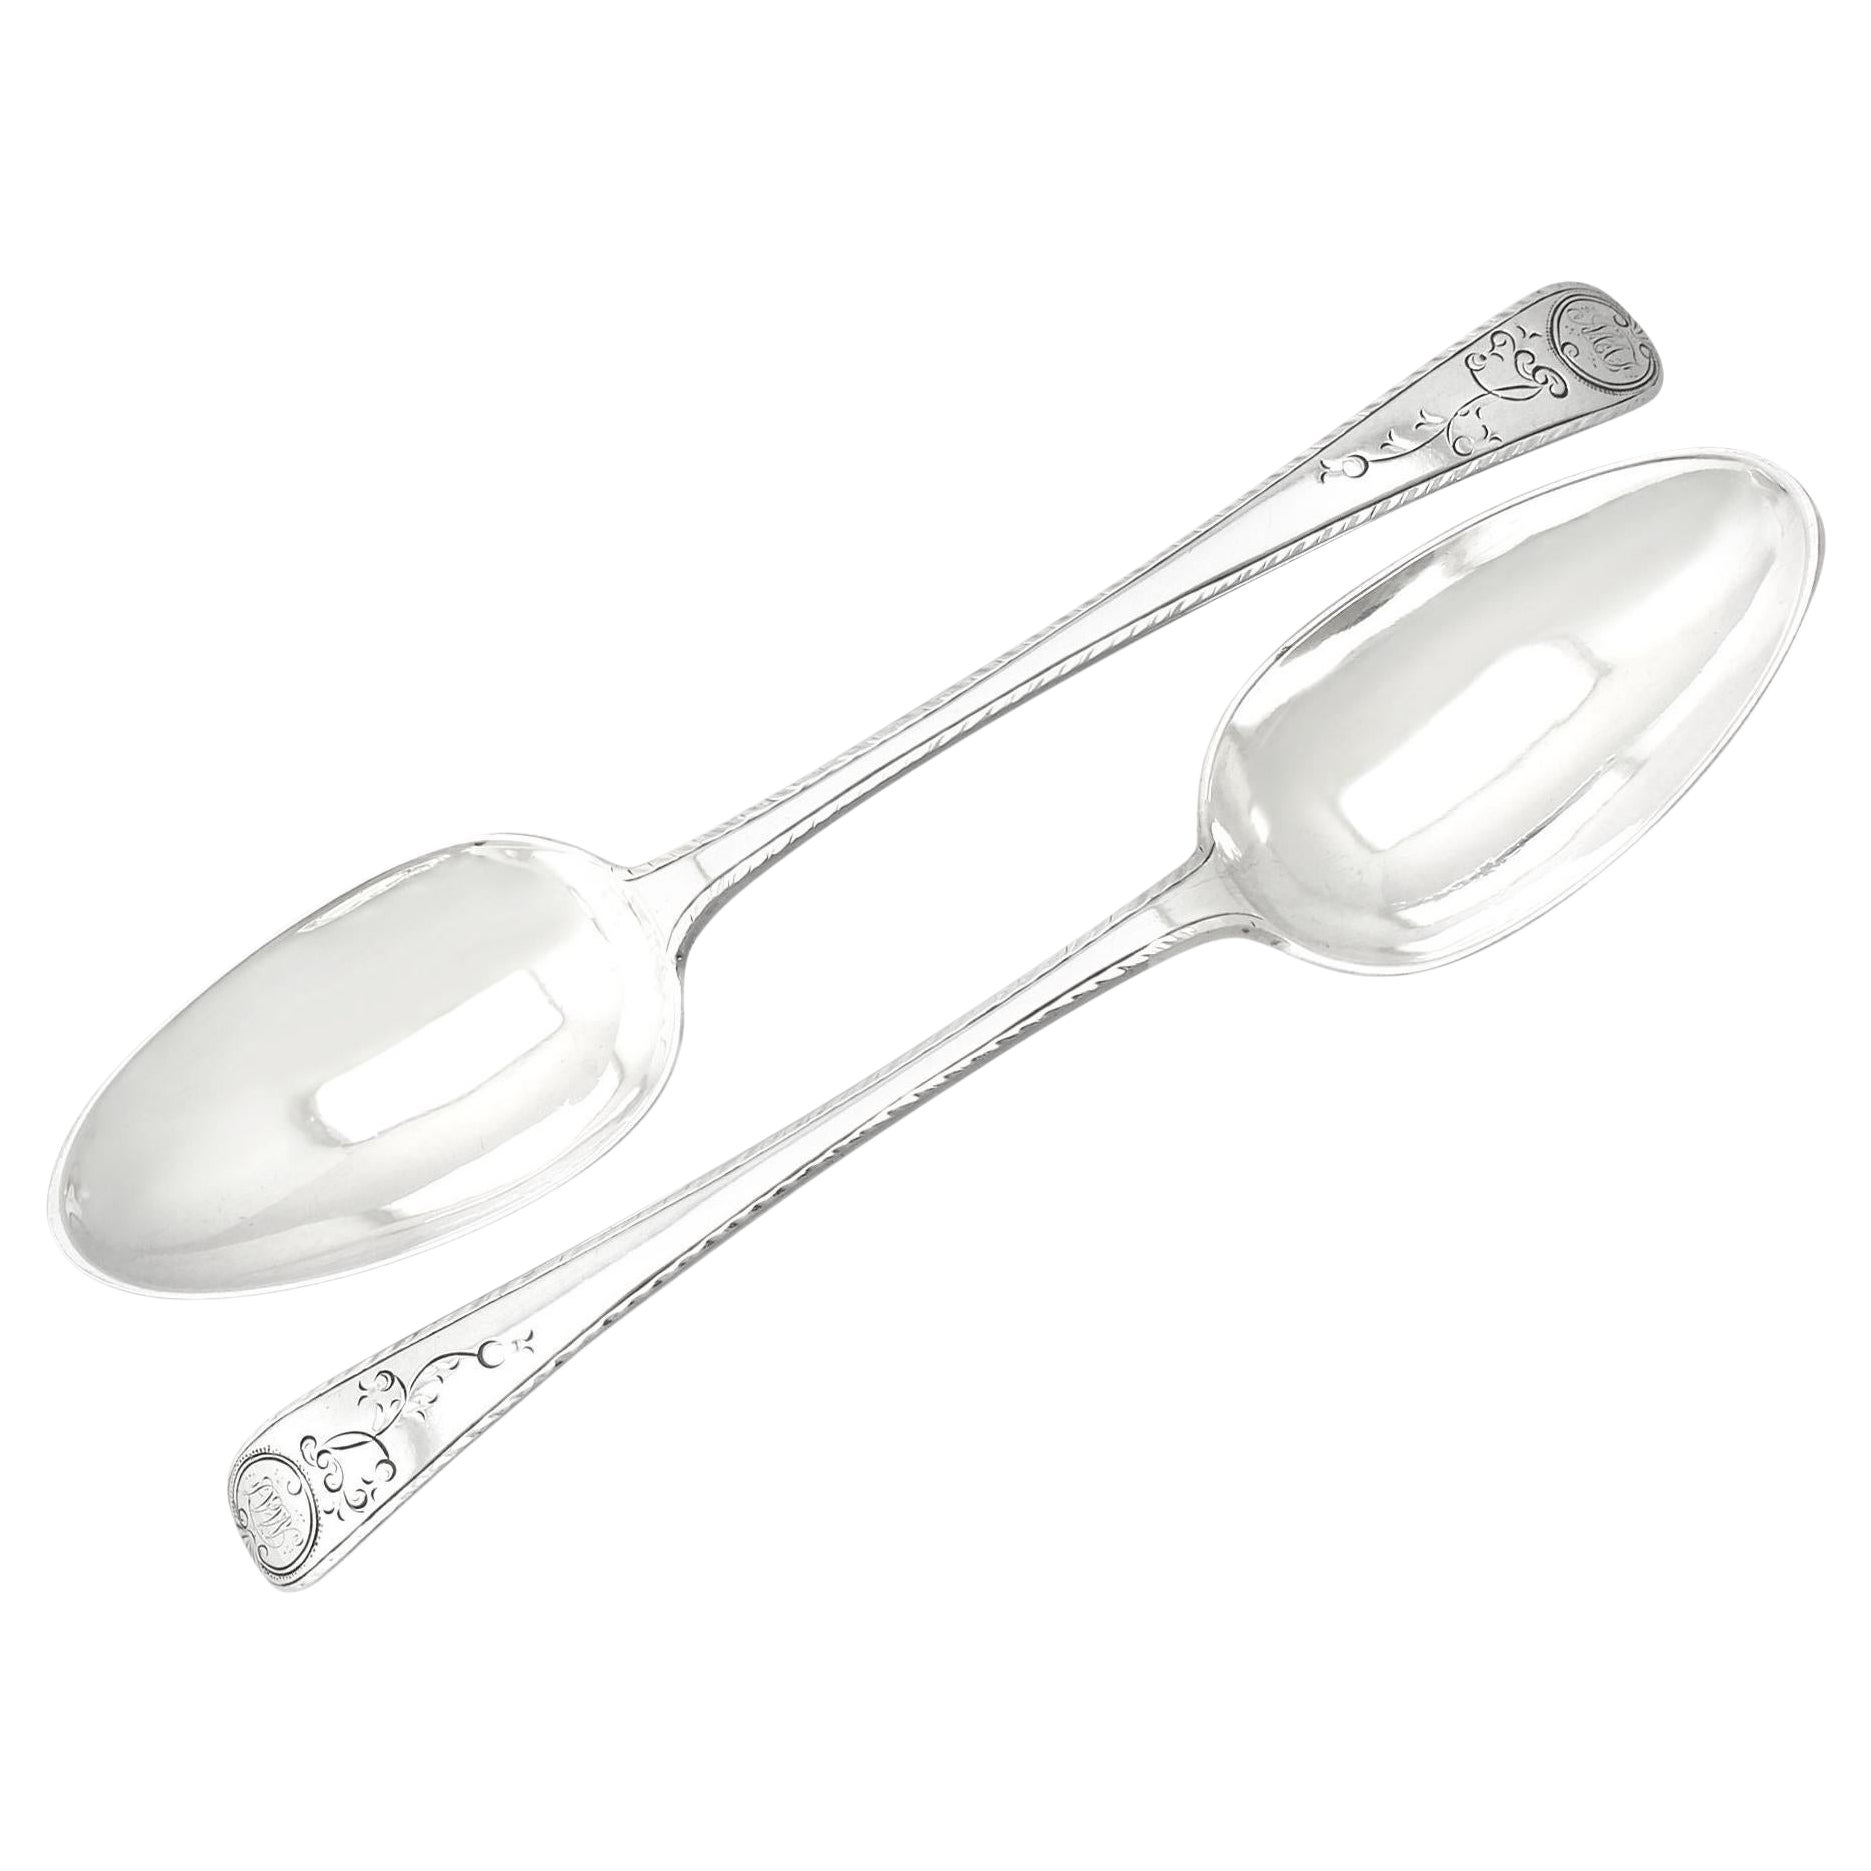 Newcastle Sterling Silver Old English Feather Edge Pattern Table Spoons For Sale